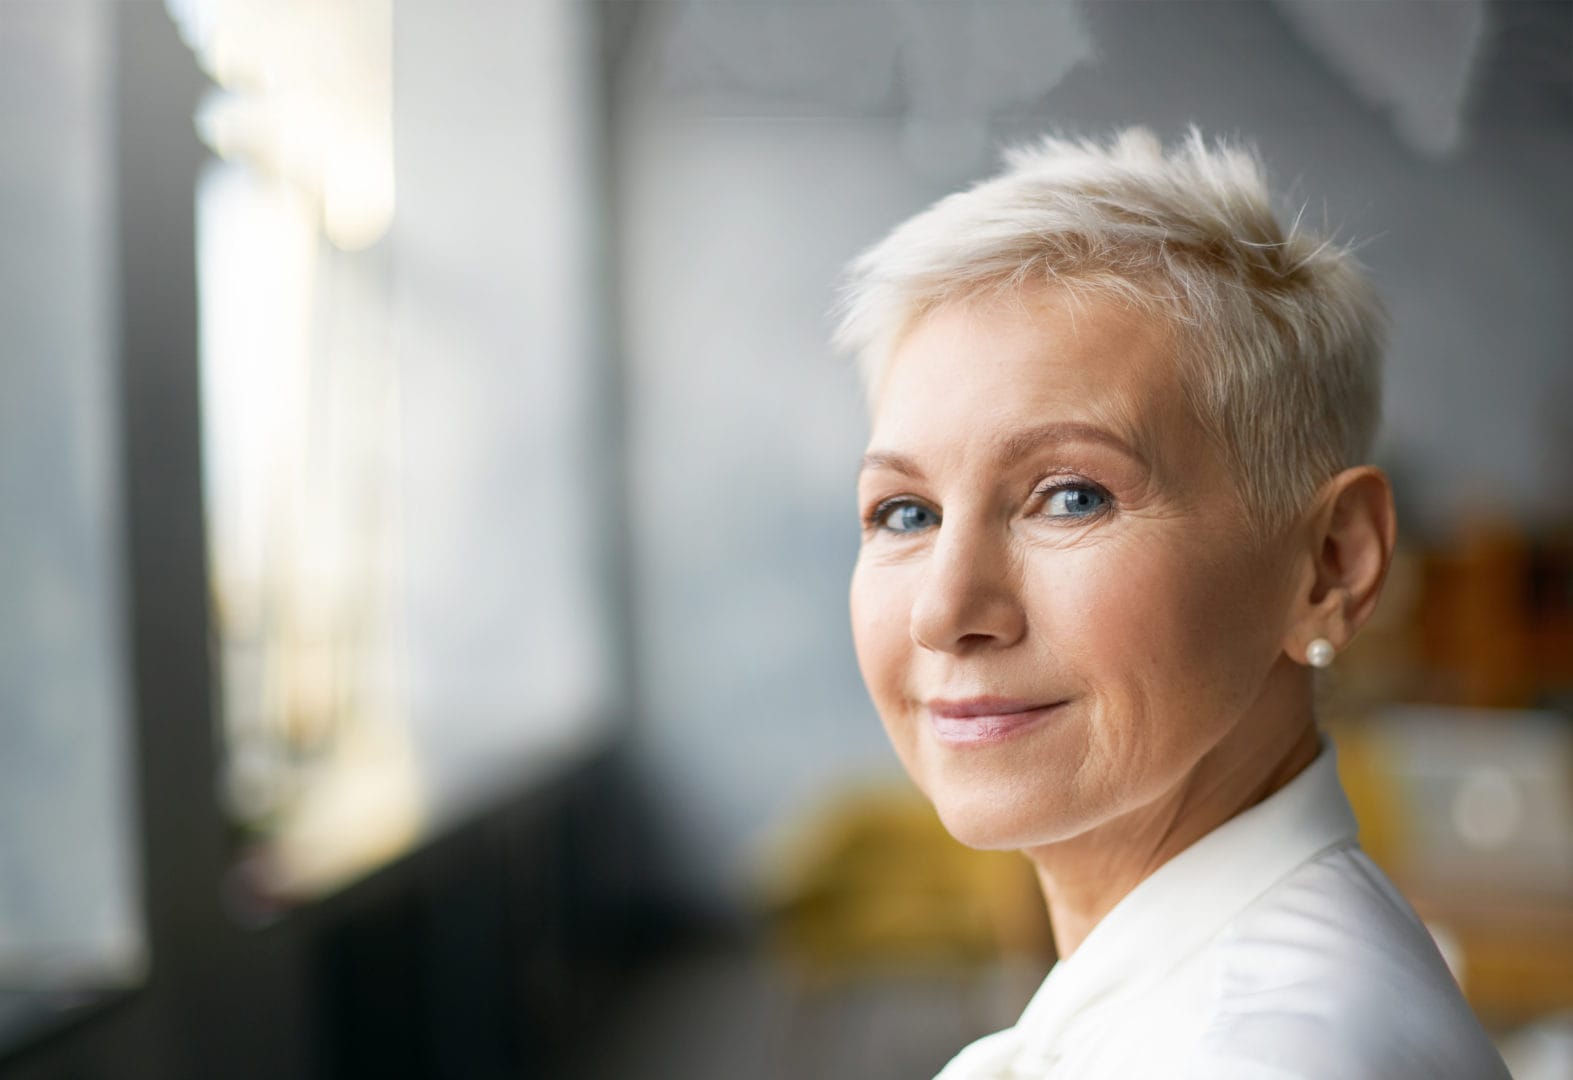 Close Up Portrait Of Attractive Mature Caucasian Woman With Blonde Pixie Haircut And Wrinkles Looking At Camera With Confident Smile While Working In Her Office. Business, Work, Job And Profession